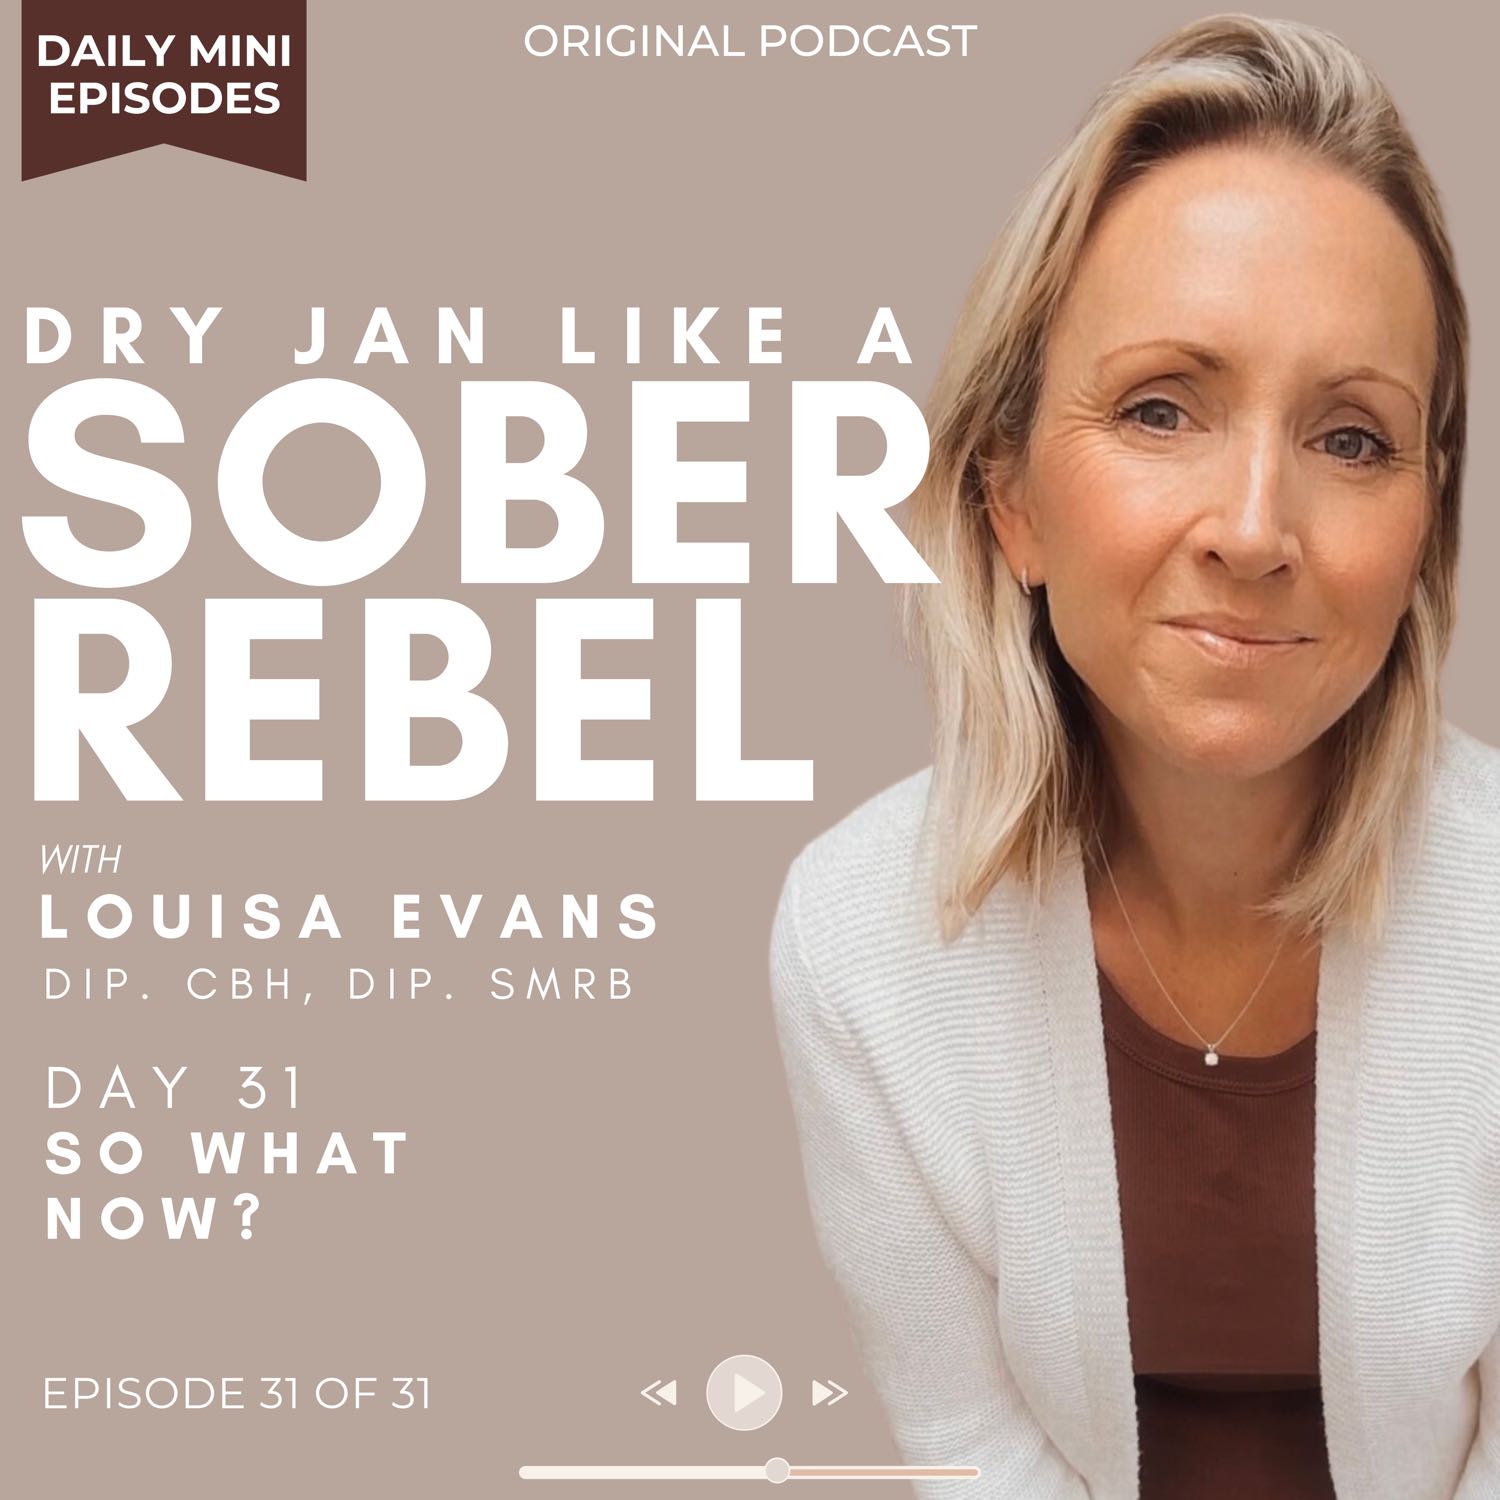 Dry Jan like a Sober Rebel | So what now? | Day 31